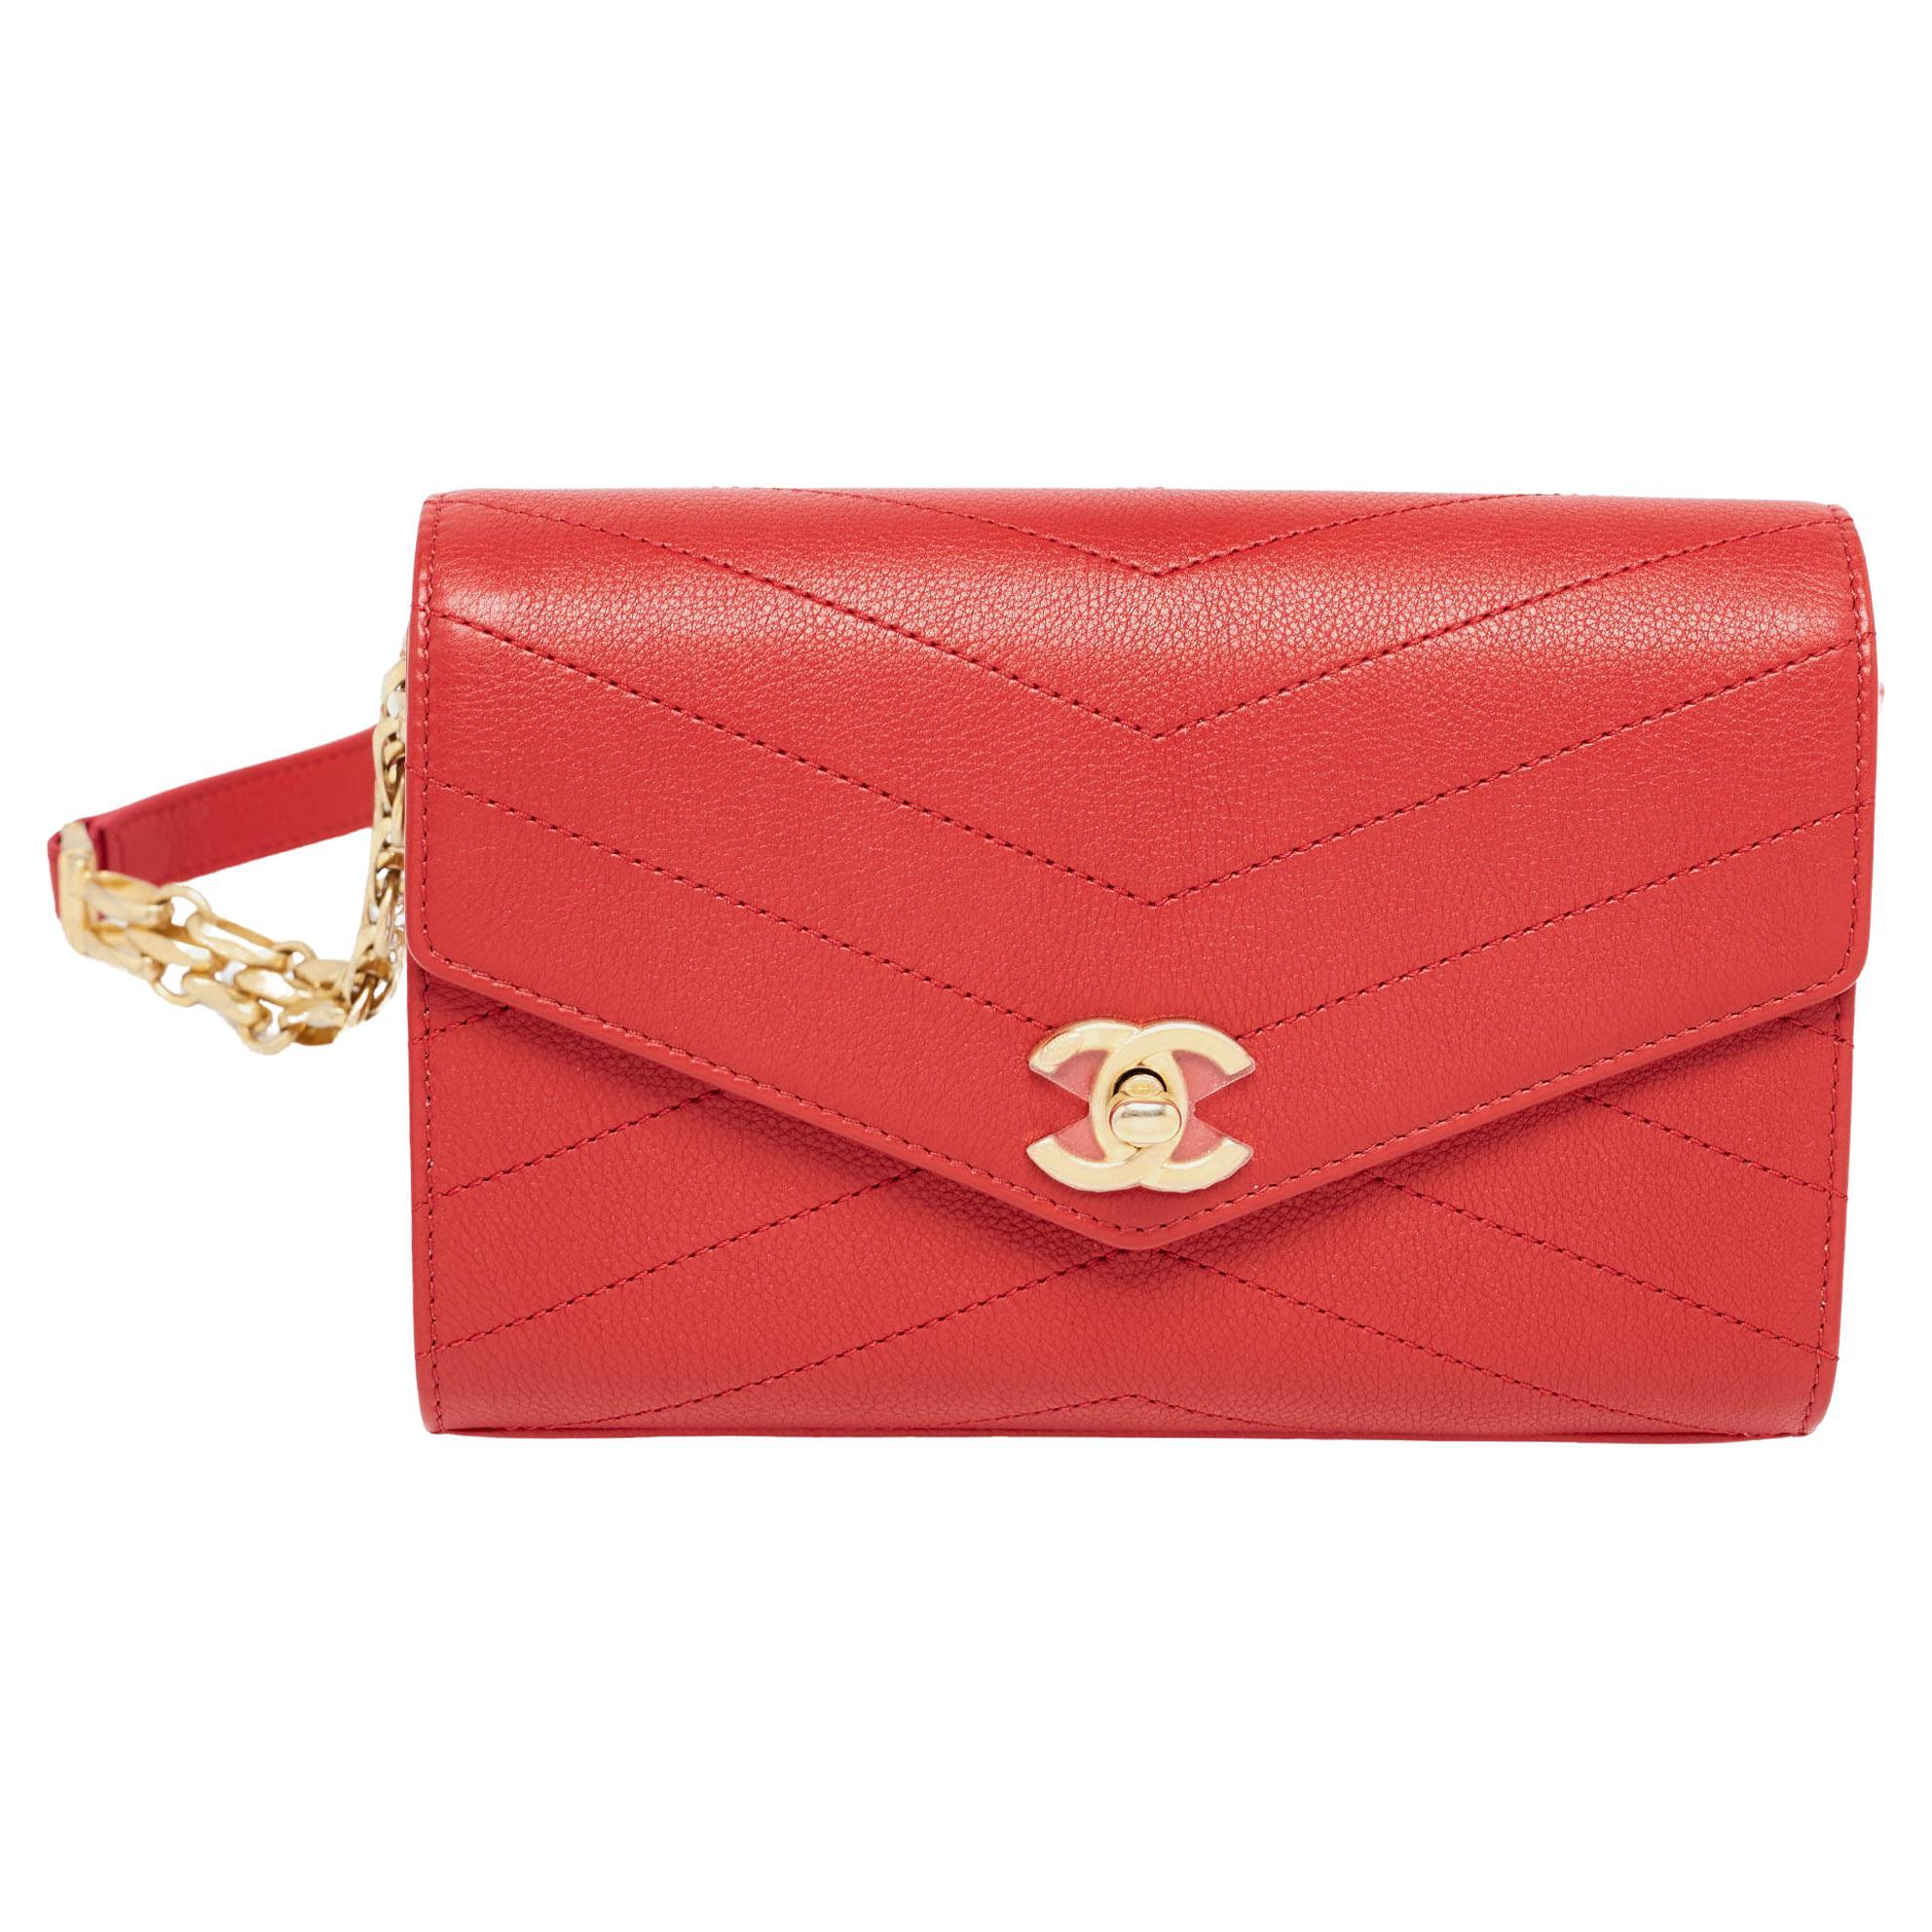 Chanel Red Chevron Leather Coco Waist Belt Bag For Sale